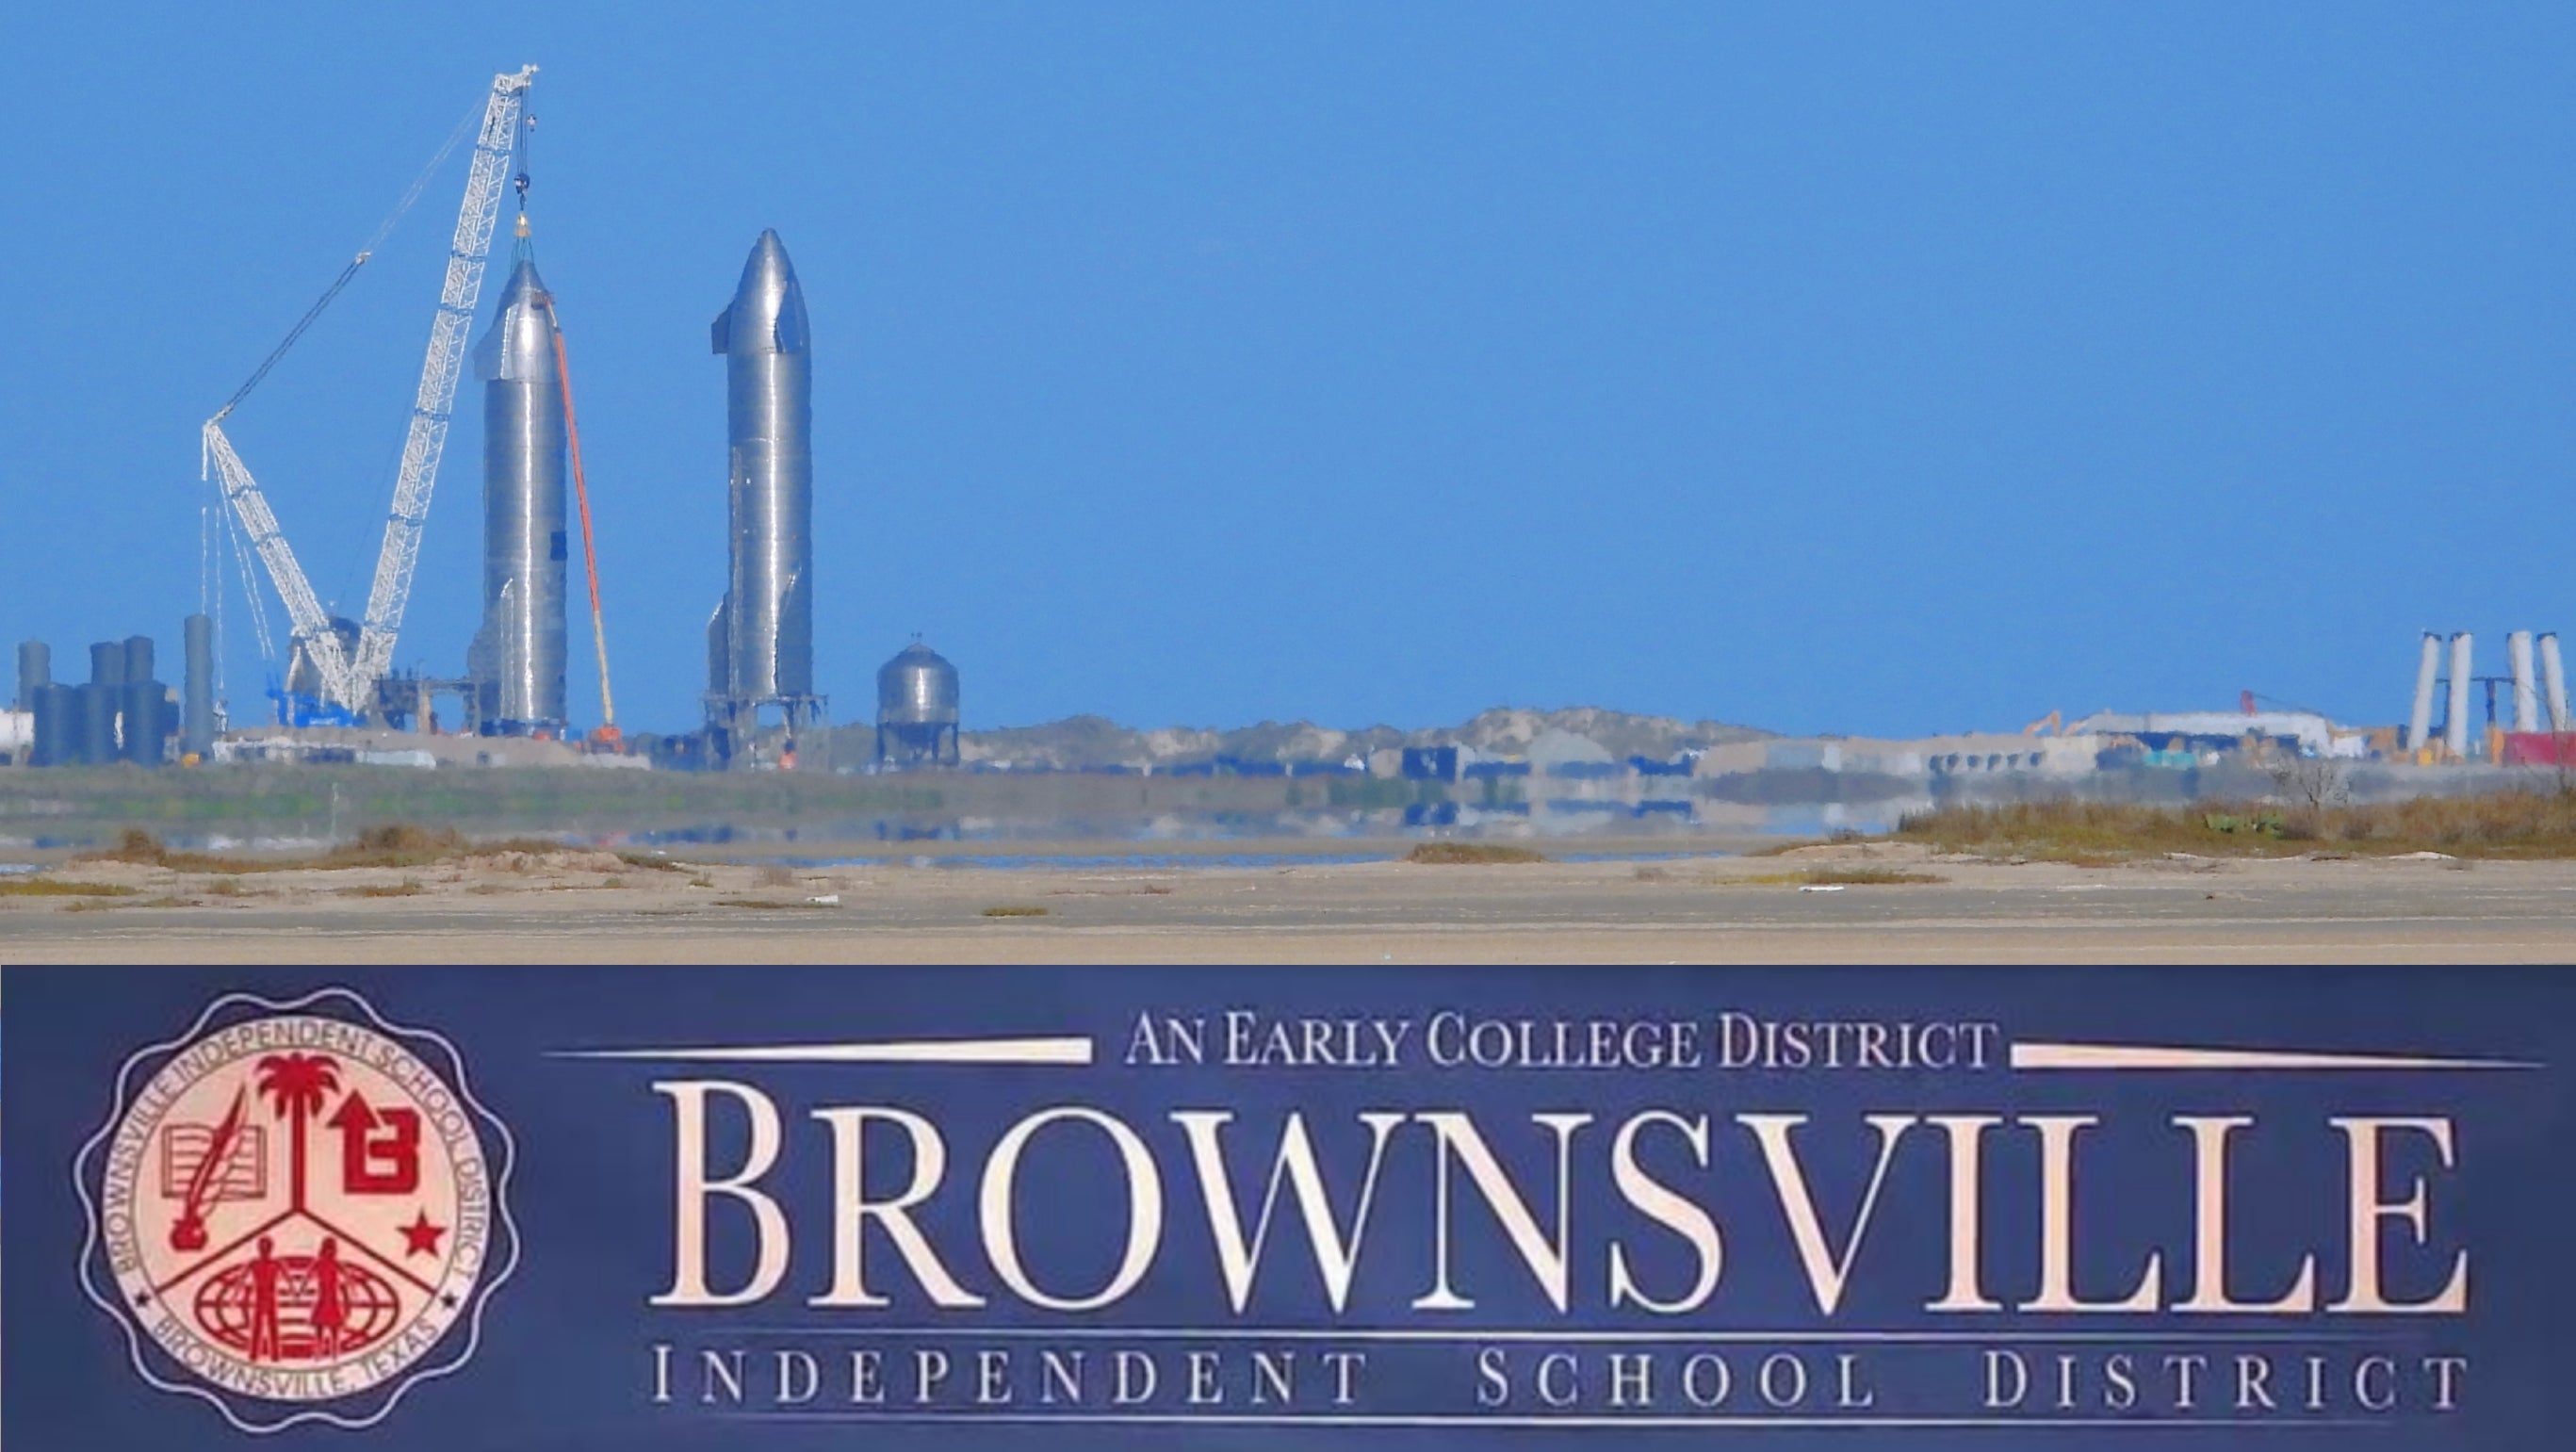 SpaceX Founder Elon Musk Donates An Additional $2 Million To Brownsville Independent School District